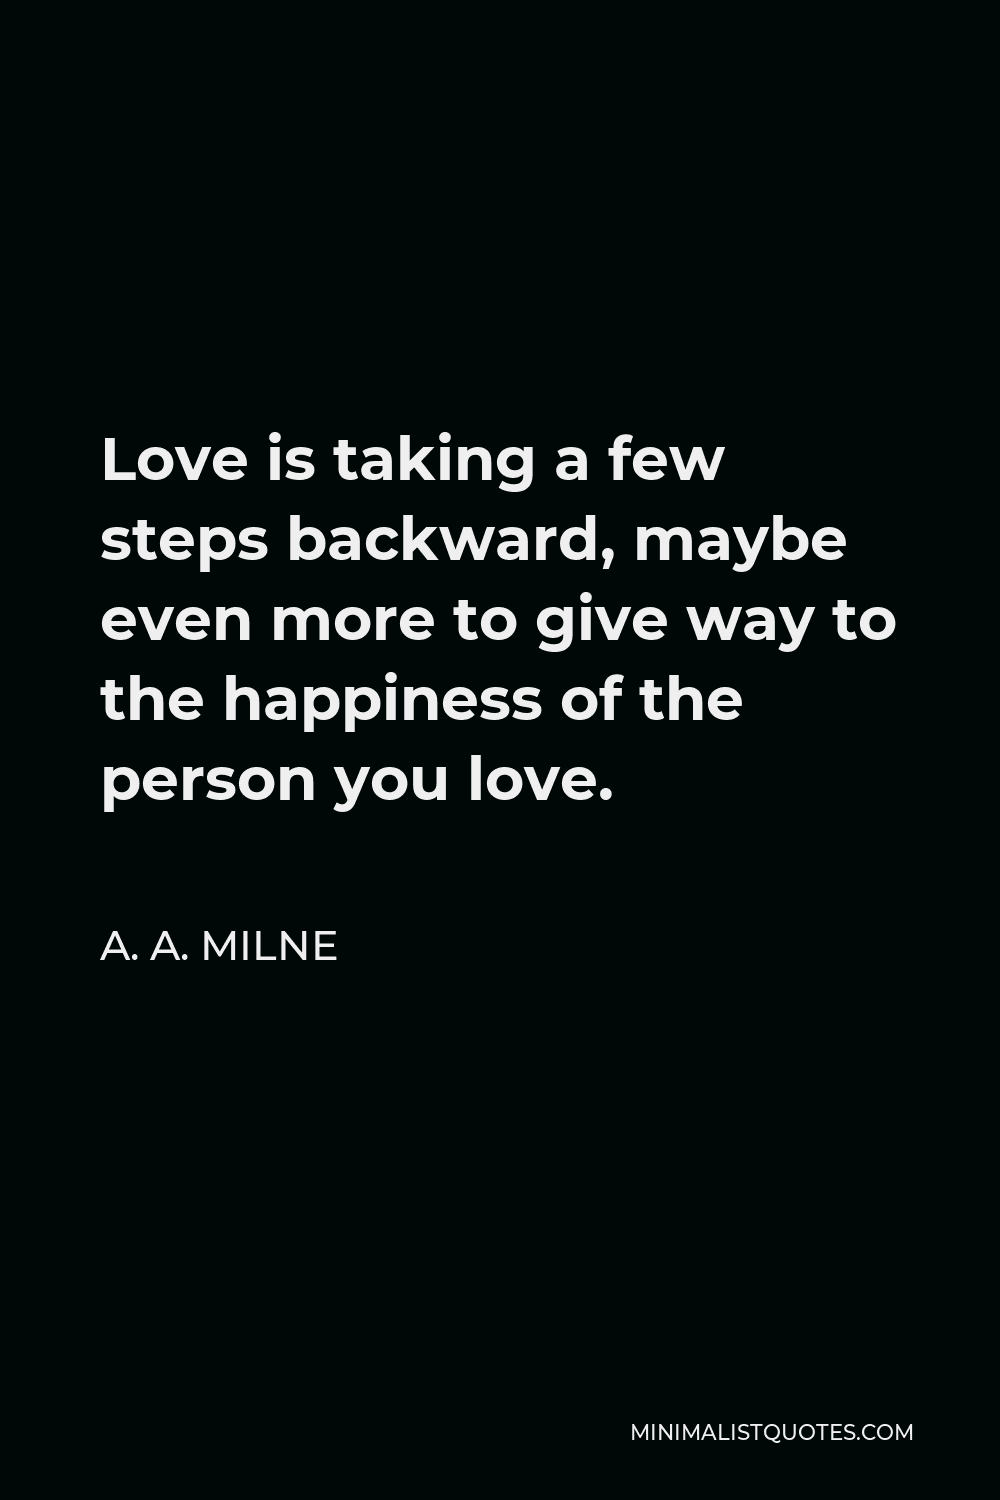 A. A. Milne Quote - Love is taking a few steps backward, maybe even more to give way to the happiness of the person you love.